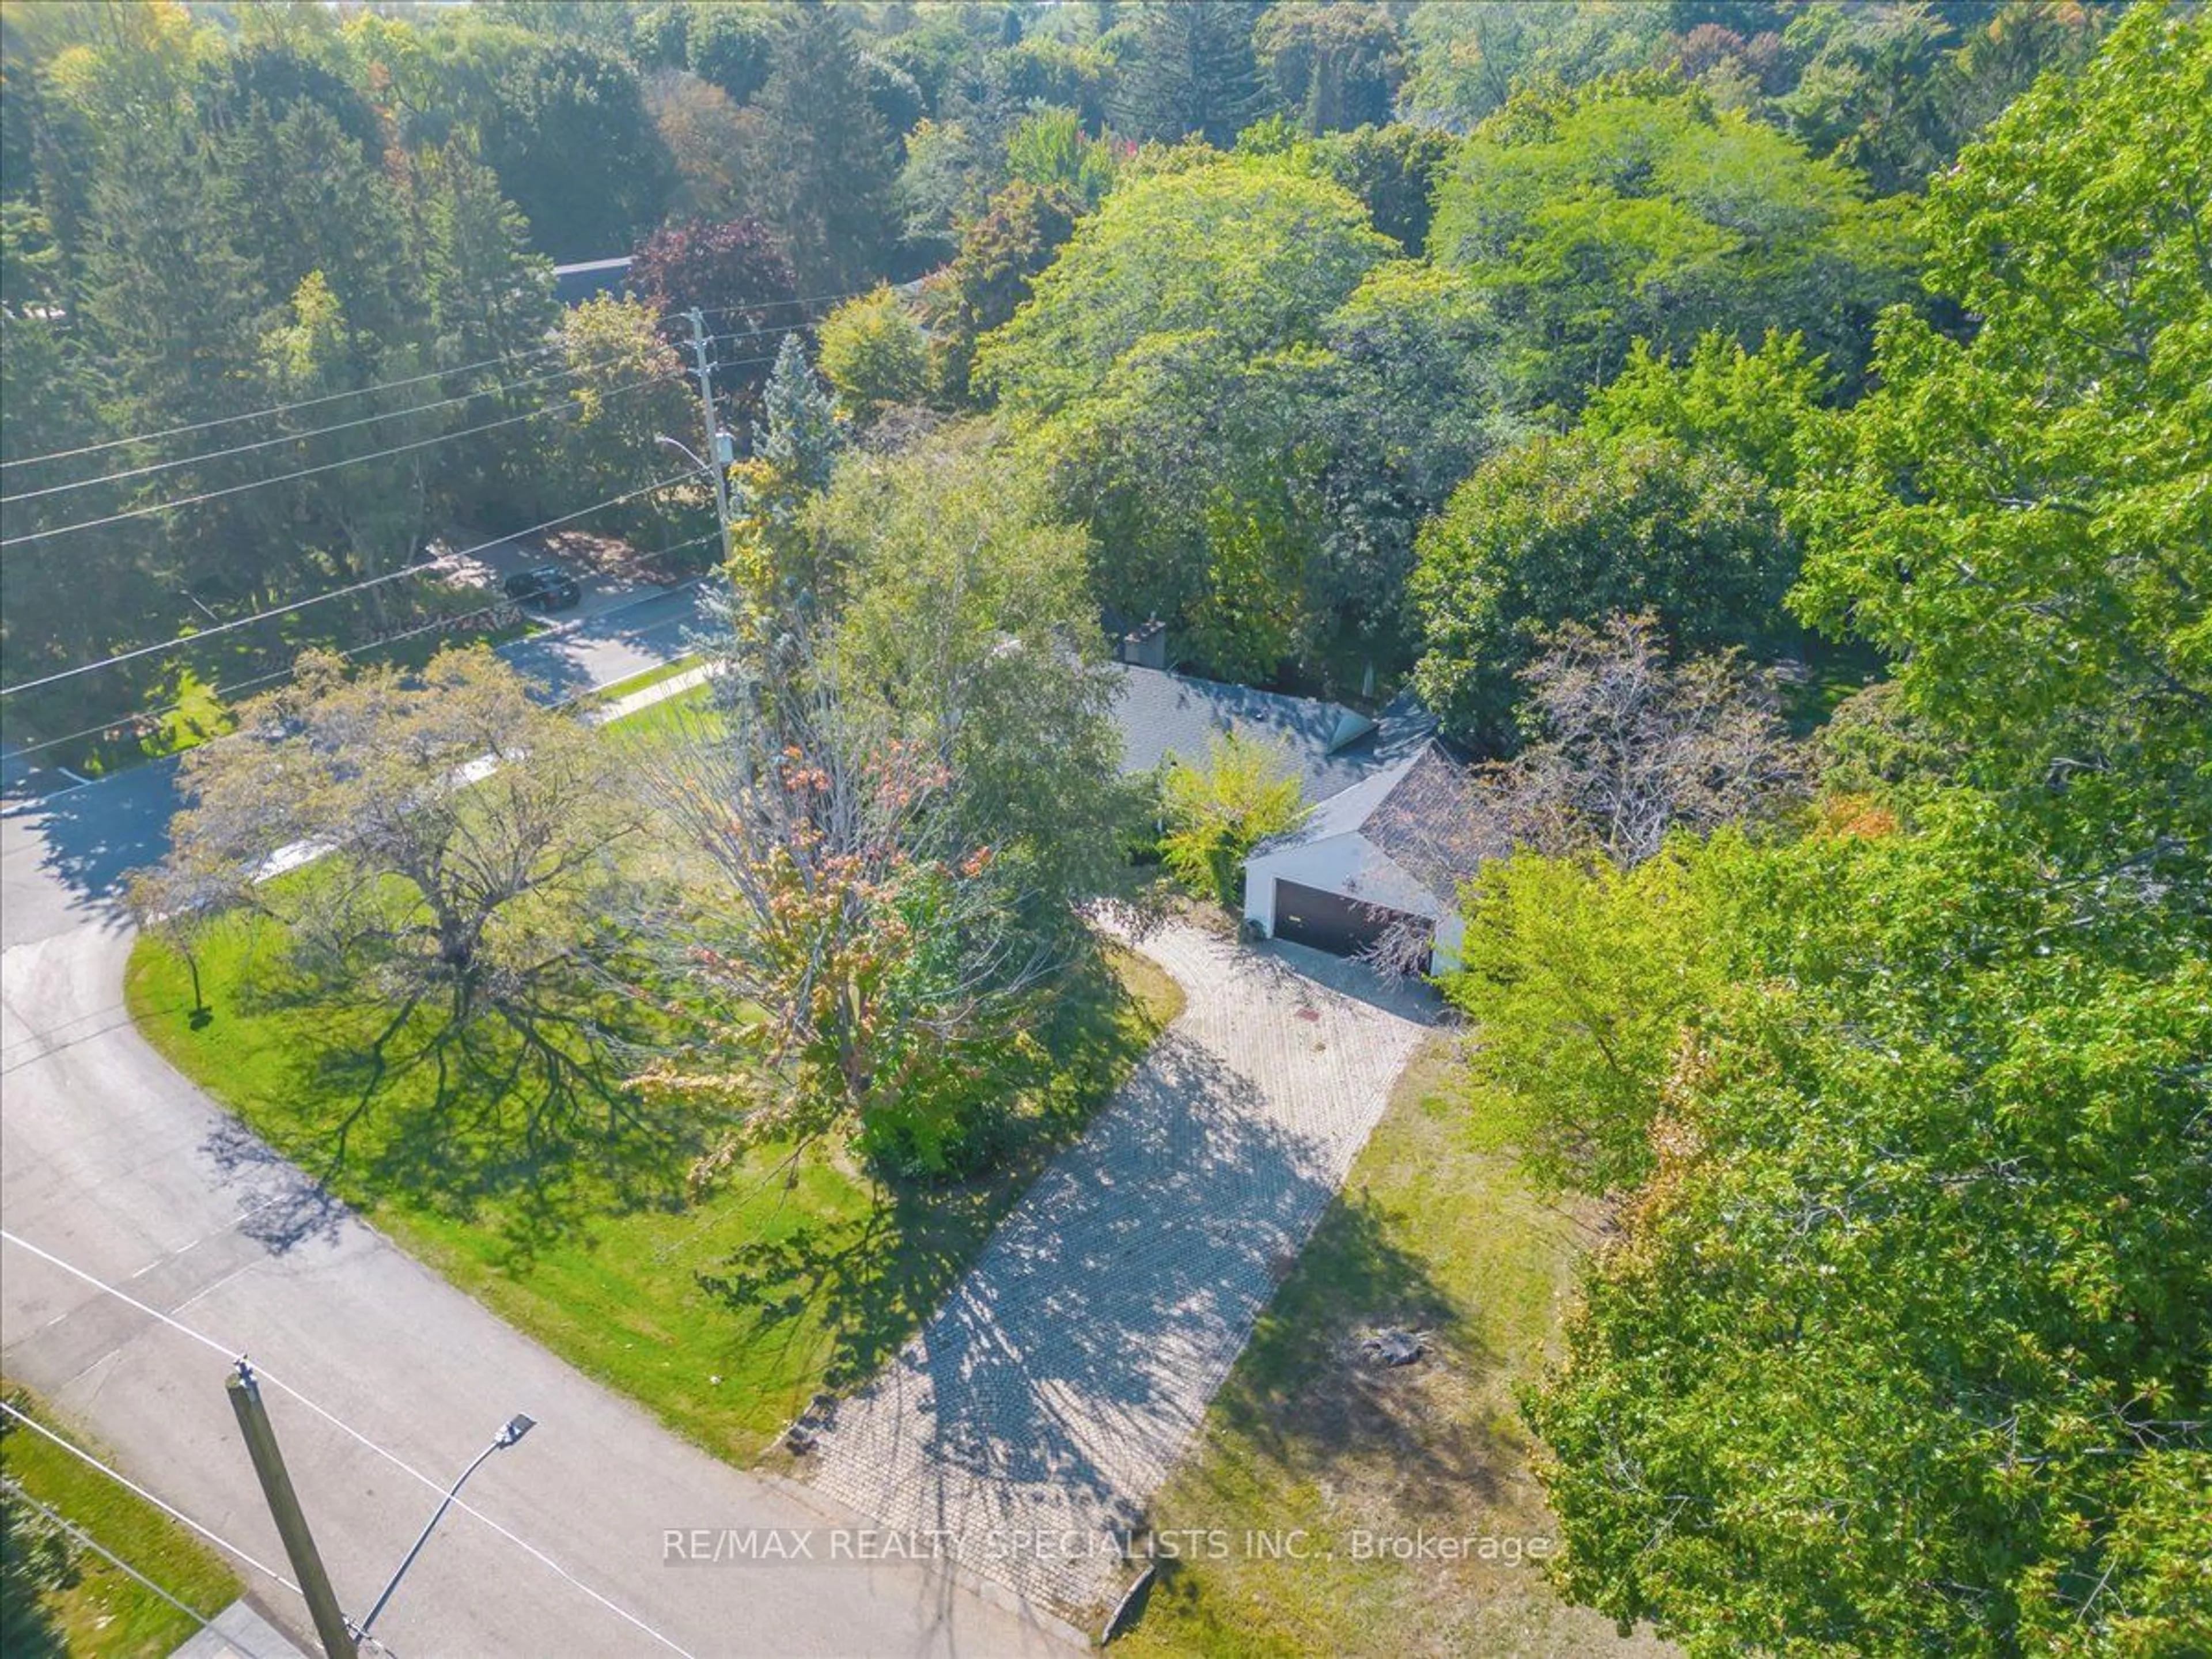 Street view for 500 Old Poplar Row, Mississauga Ontario L5J 2N8